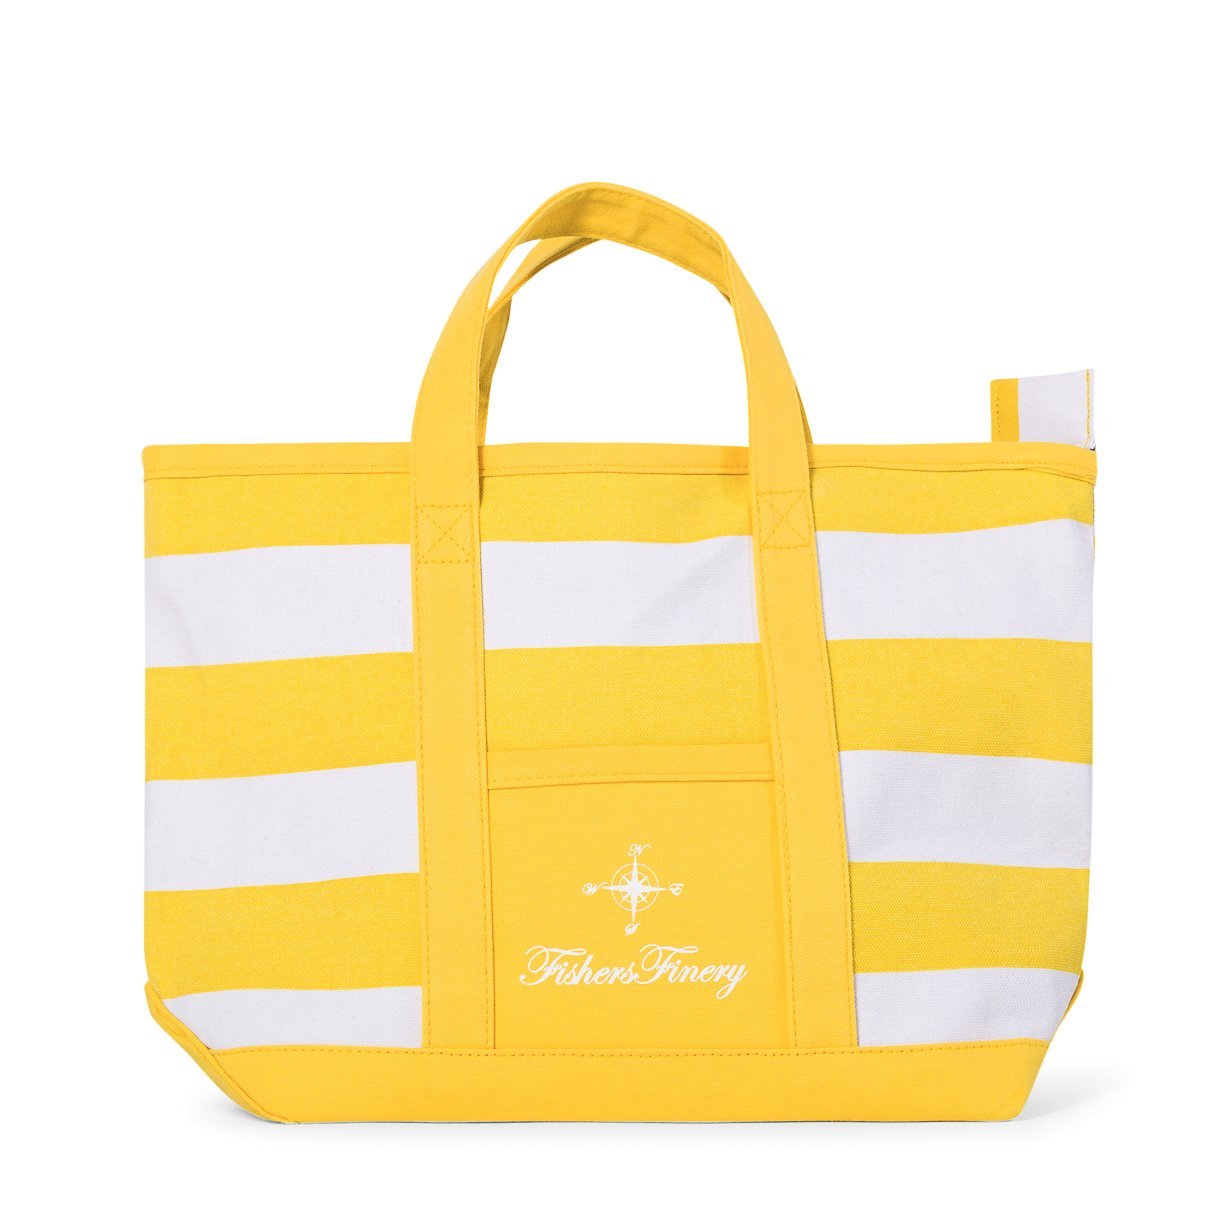 Canvas Travel Tote with Zipper Closure - Multiple Sizes and Colors Home>Luggage Fishers Finery Yellow Medium 